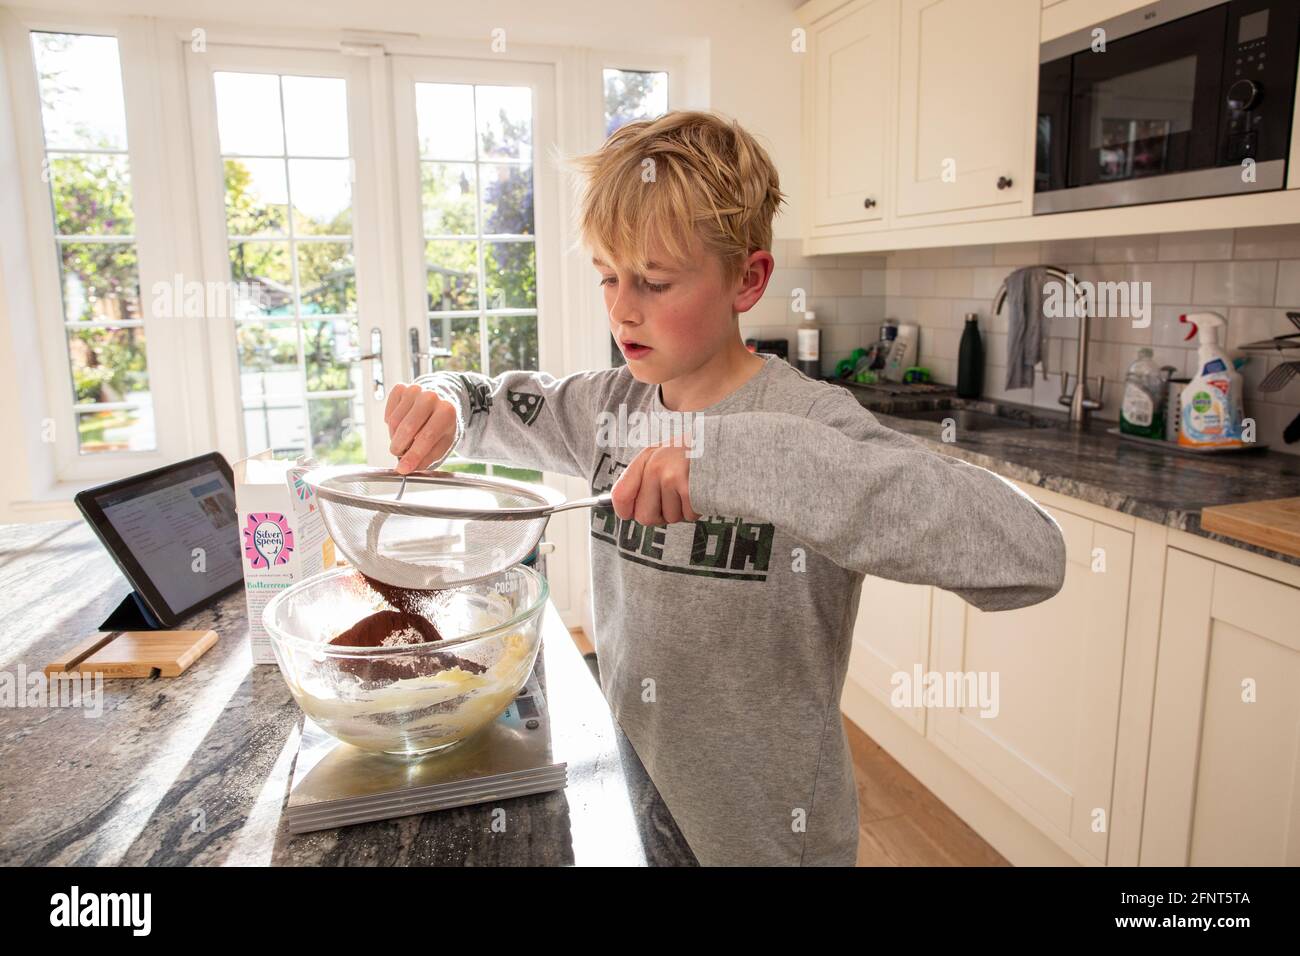 10-year-old boy preparing ingredients to bake a chocolate cake at home, England, United Kingdom Stock Photo